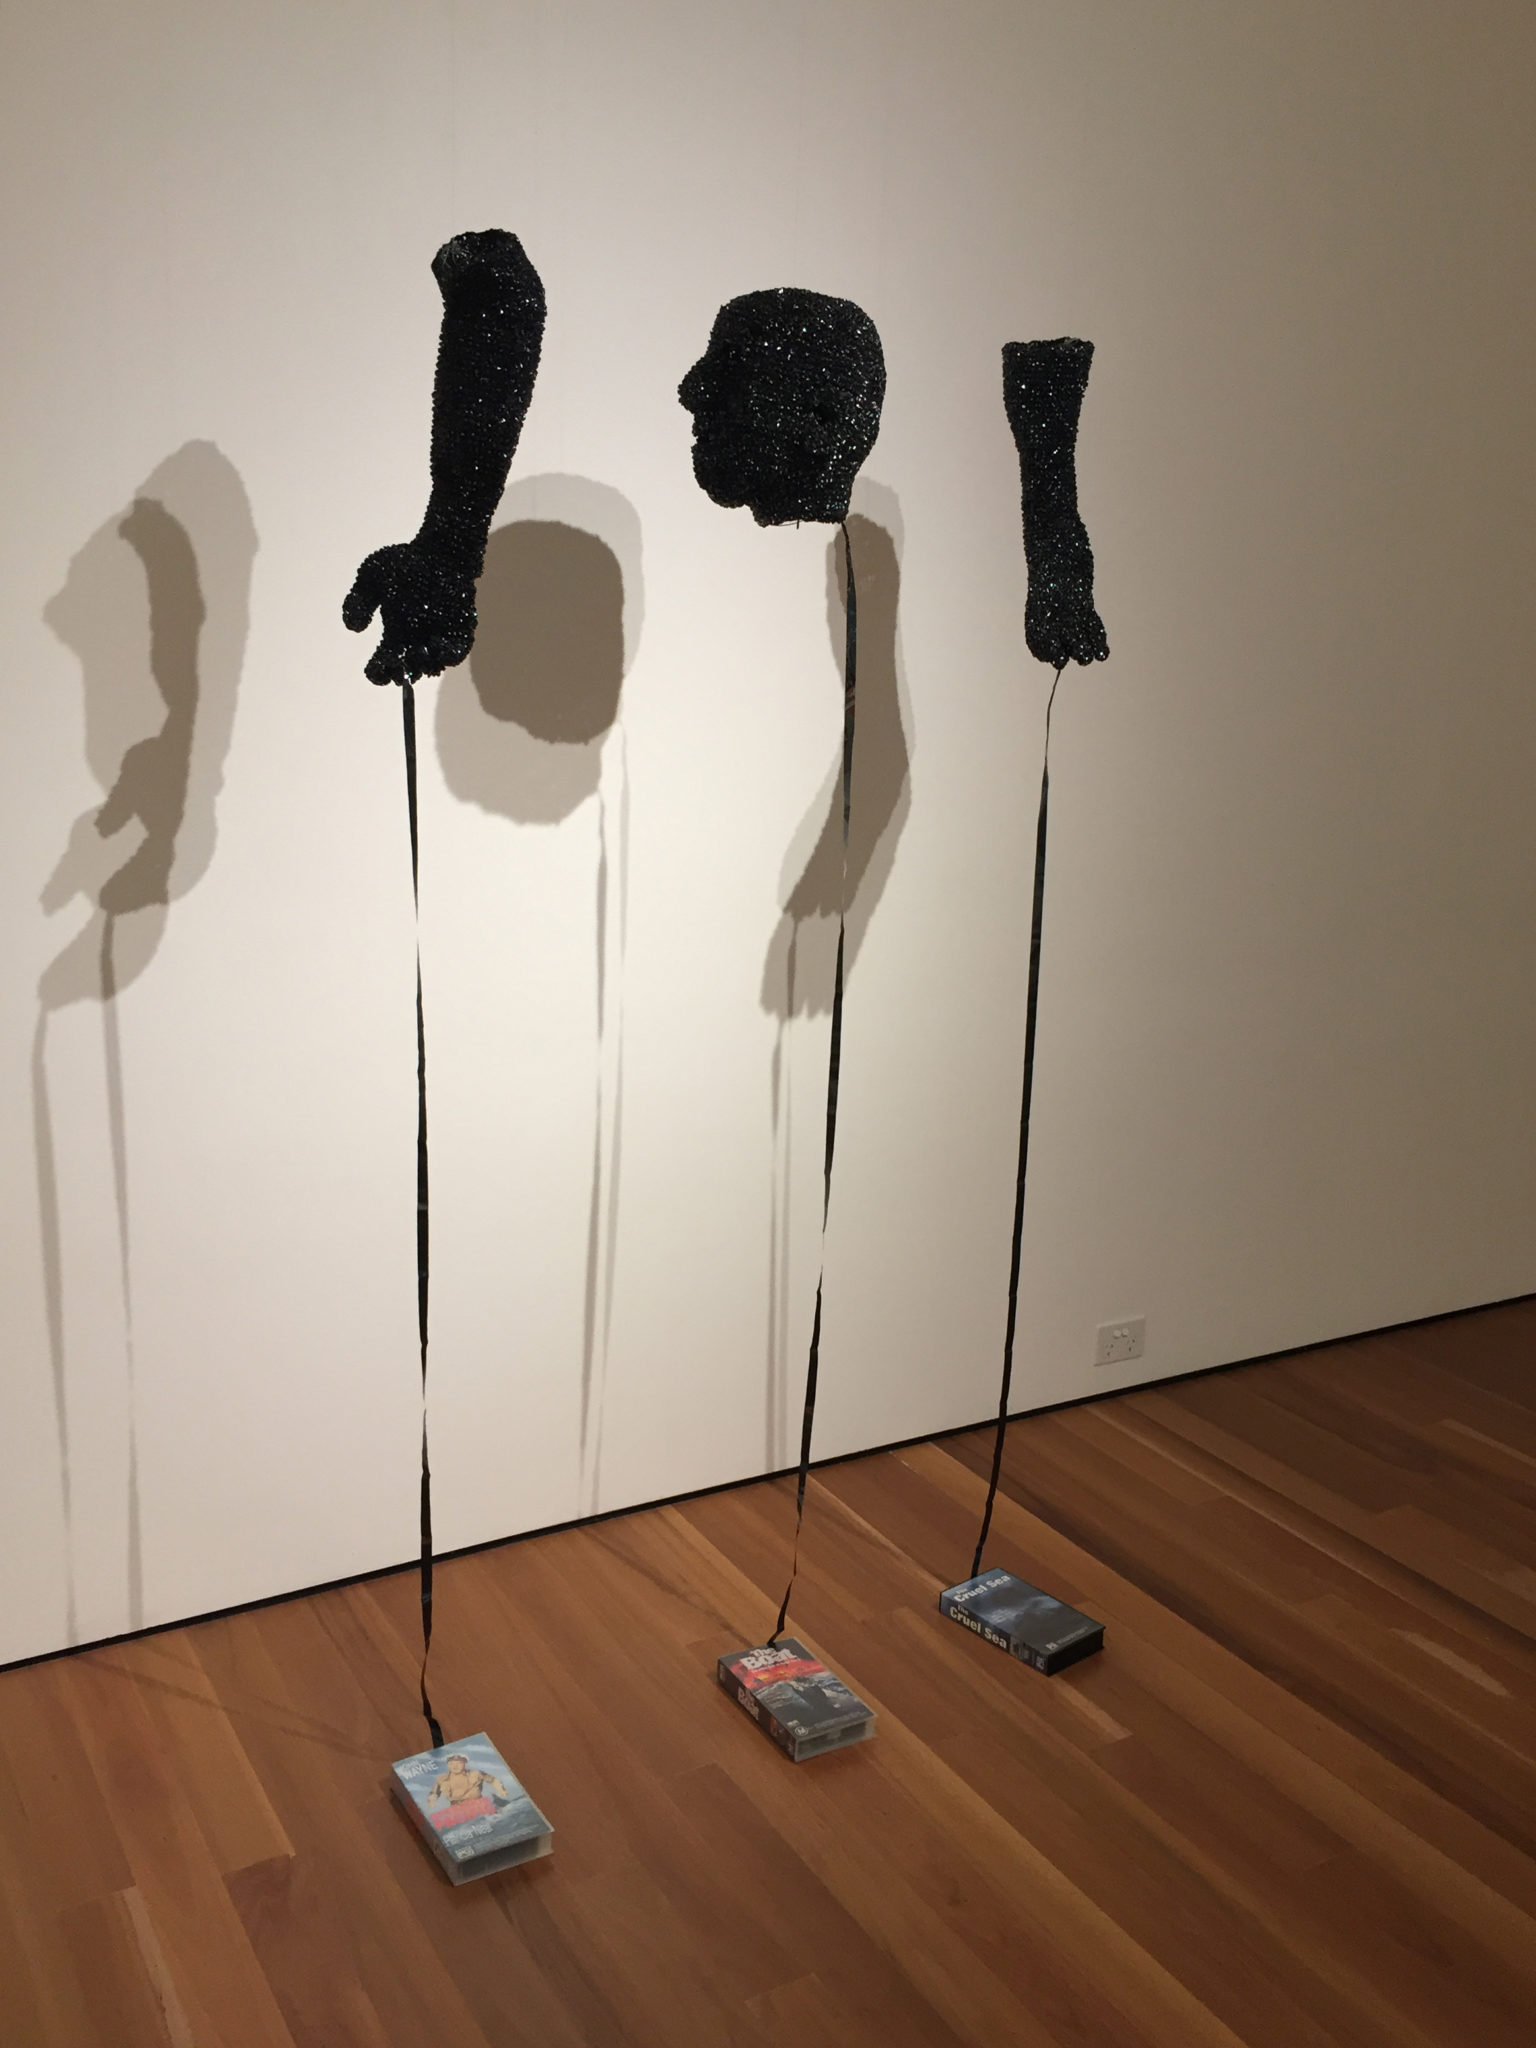 Exhibition documentation of Fiona Hall, All at Sea, 1998, Video tape, plastic, wire, nylon and paper, 3 parts 150 x 200 cm each, Latrobe Regional Gallery Collection, purchased 1998. Shown Gallery 6, Latrobe Regional Gallery 2020.